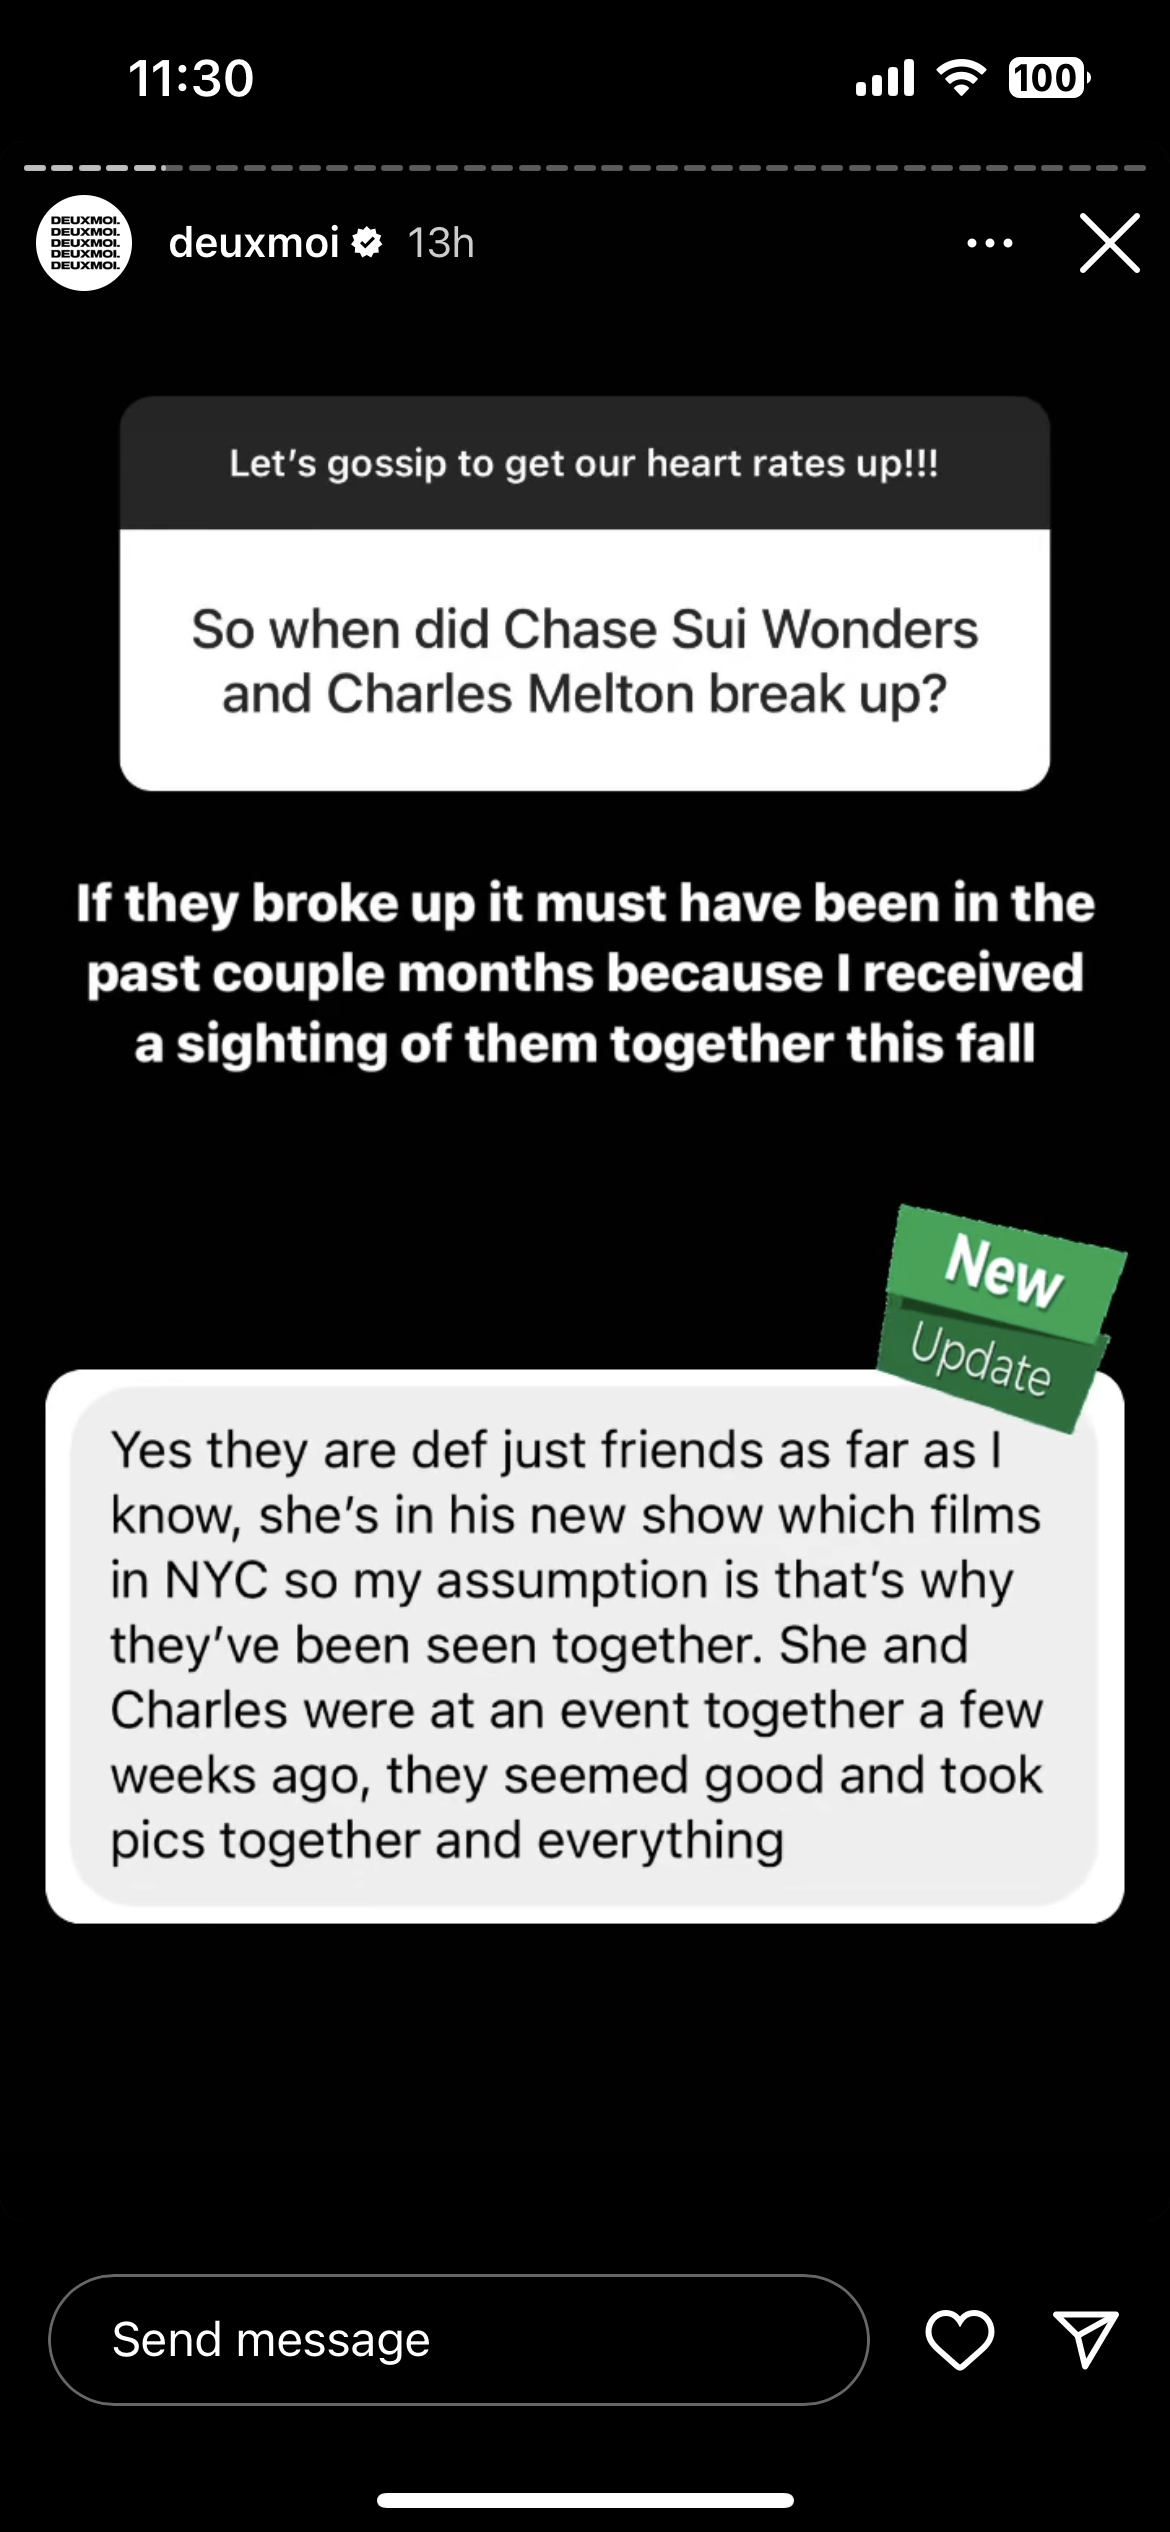 Deuxmoi reported the possibility of Charles Melton and Chase Sui Wonders' break up. 